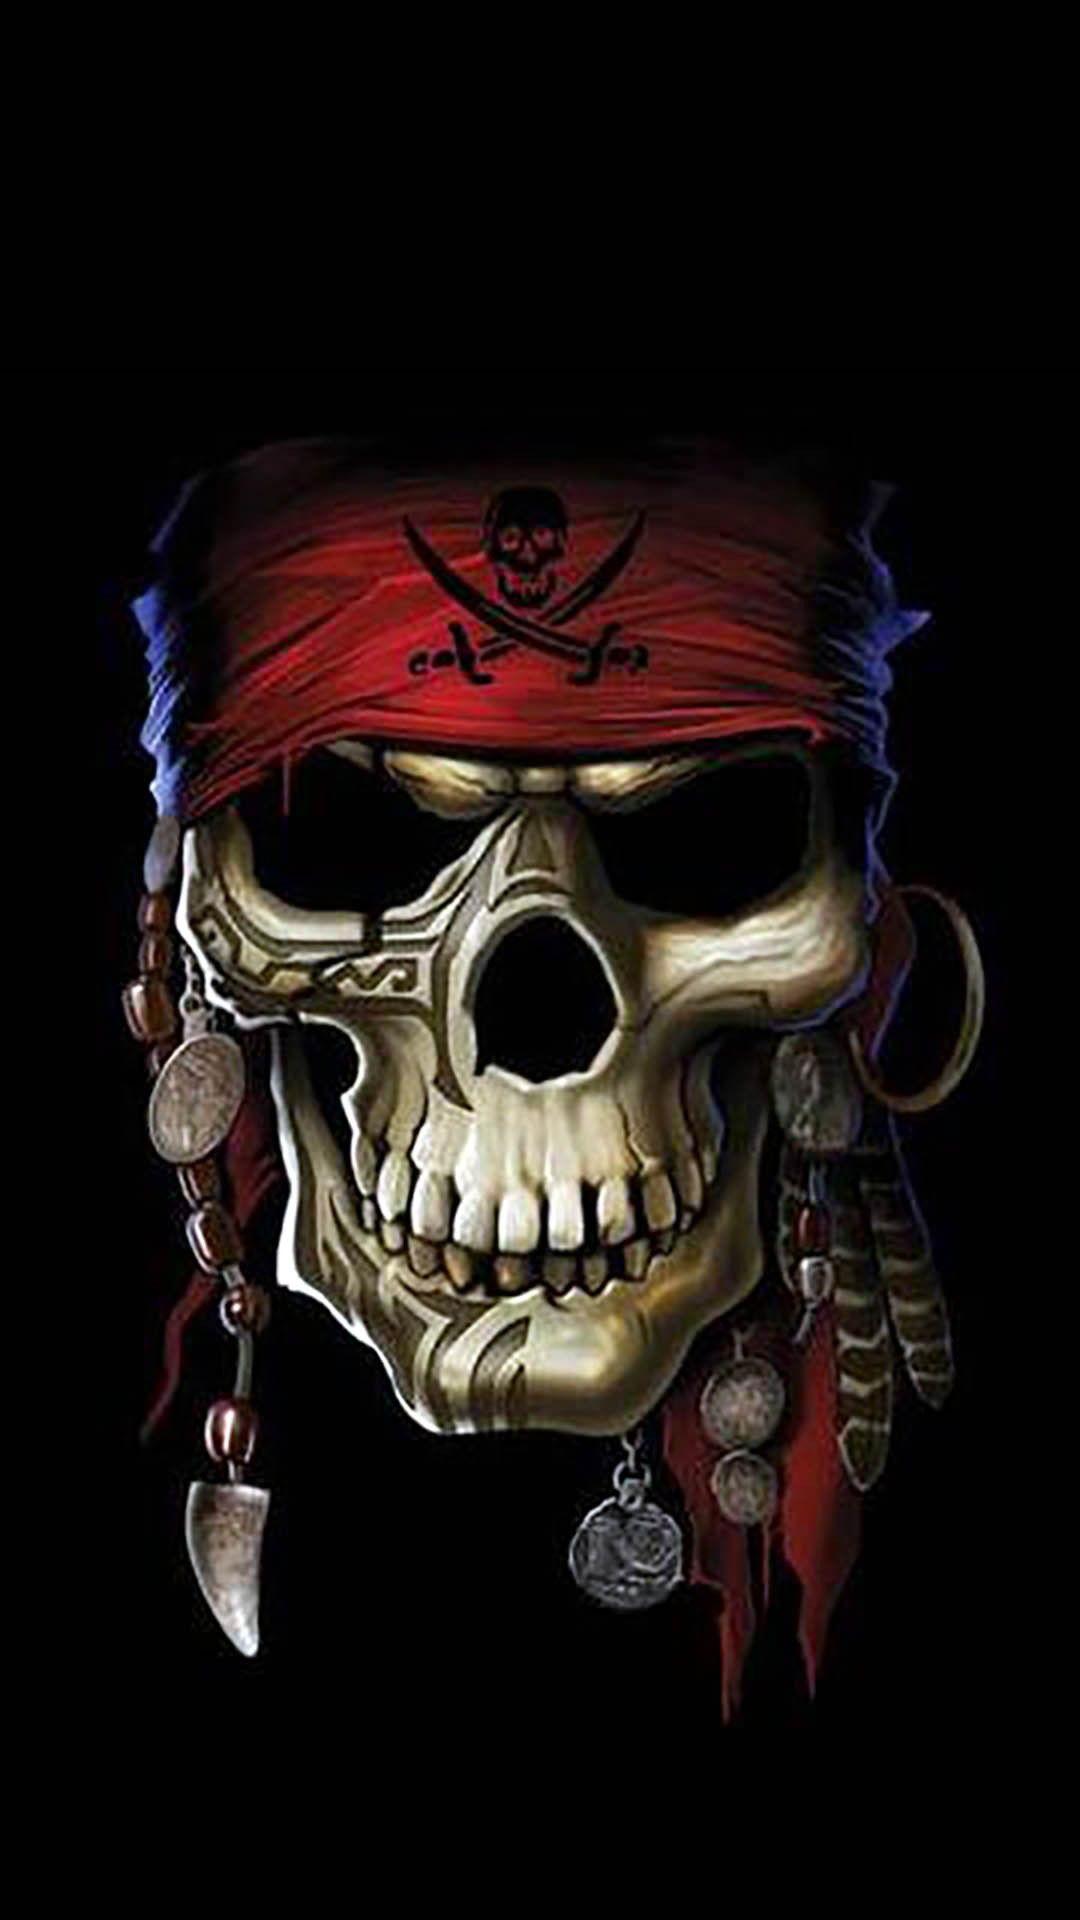 Pirates Of The Caribbean 1080x1920 Resolution Wallpapers Iphone 7,6s,6  Plus, Pixel xl ,One Plus 3,3t,5